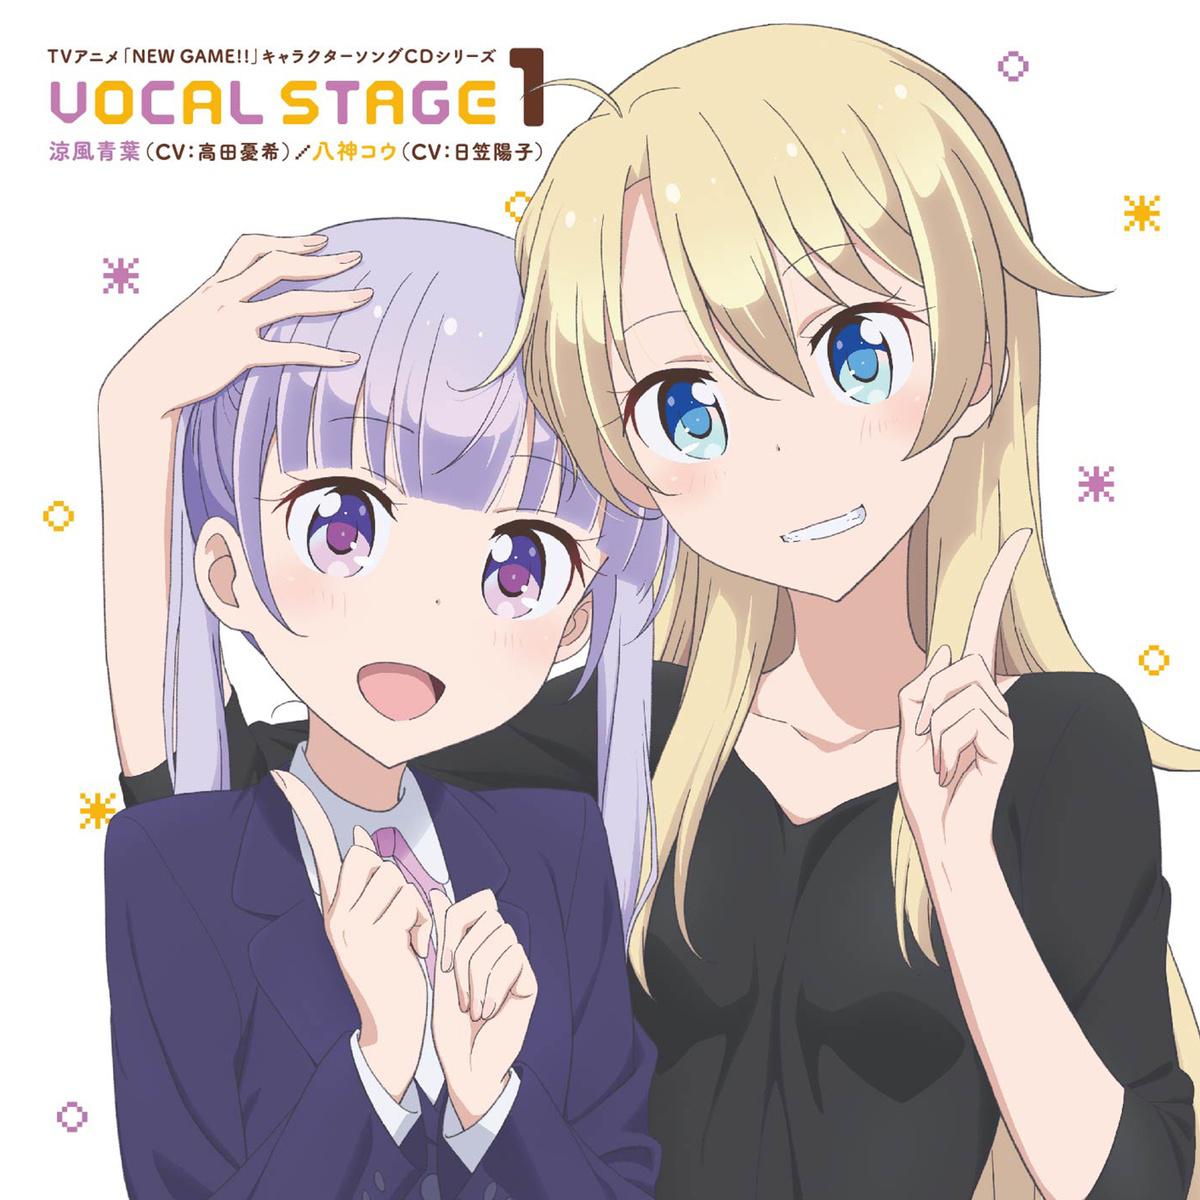 TV NEW GAME!! CD VOCAL STAGE 1